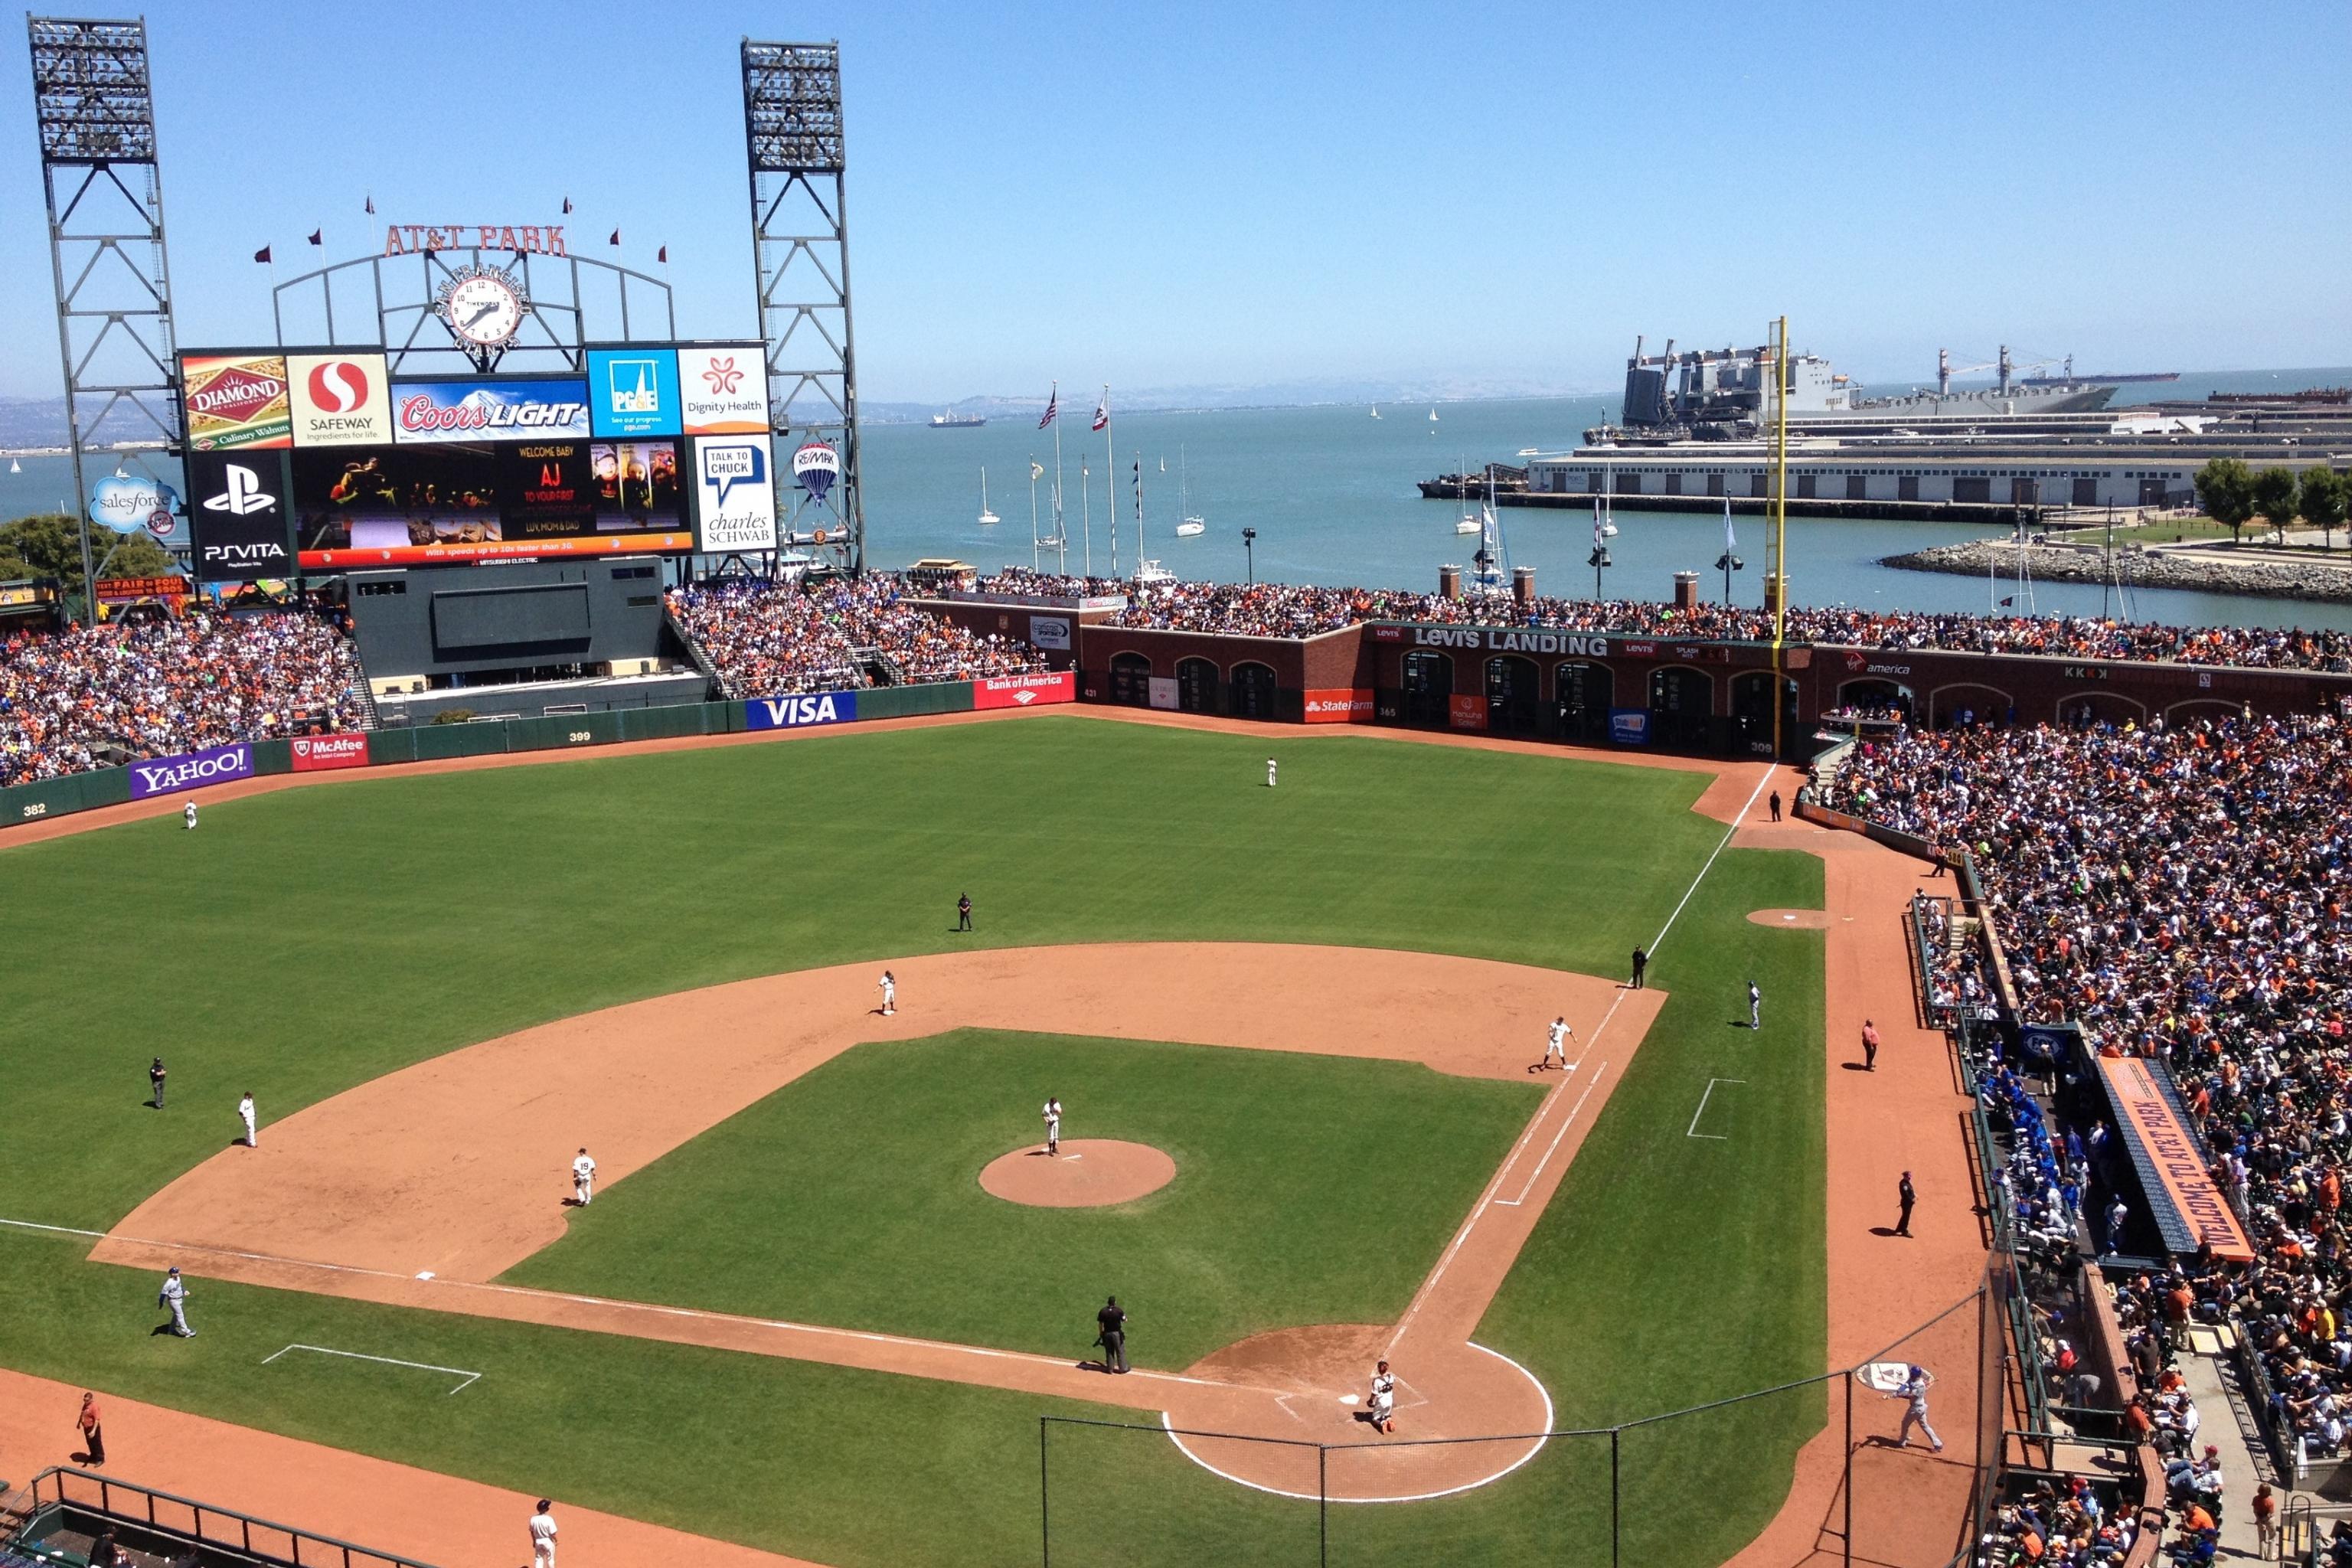 5 Things That Set AT&T Park Apart from Other MLB Ballparks